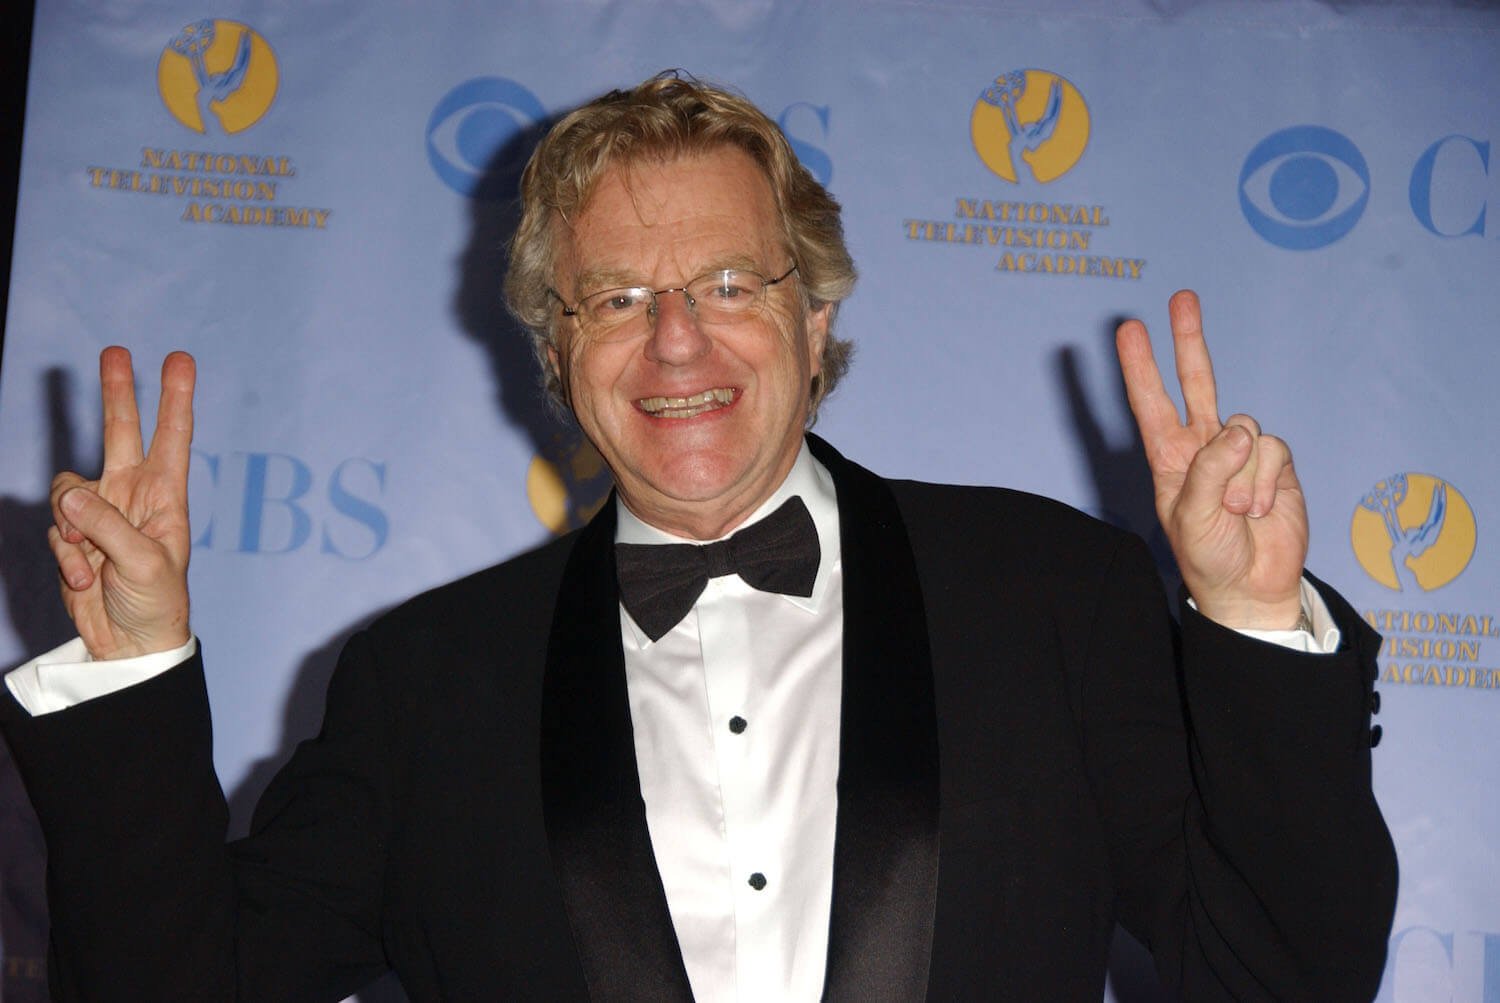 Jerry Springer holding his hands up in peace signs while wearing a suit. Jerry Springer died in 2023 with a high net worth.